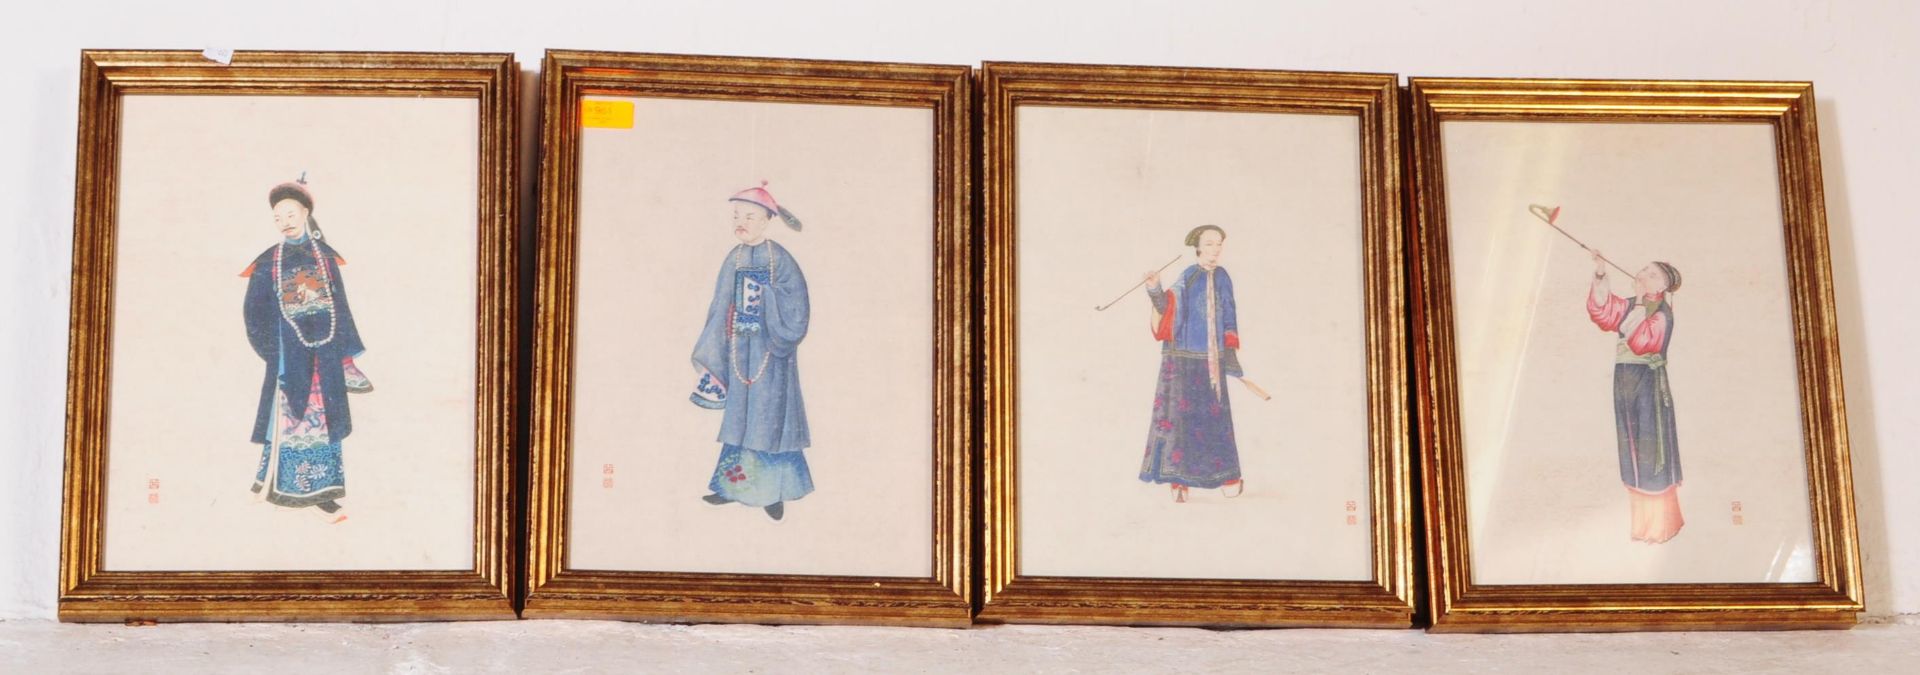 FOUR CHINESE RICE PAPER PRINTS - TRADITION CHIENSE COSTUME